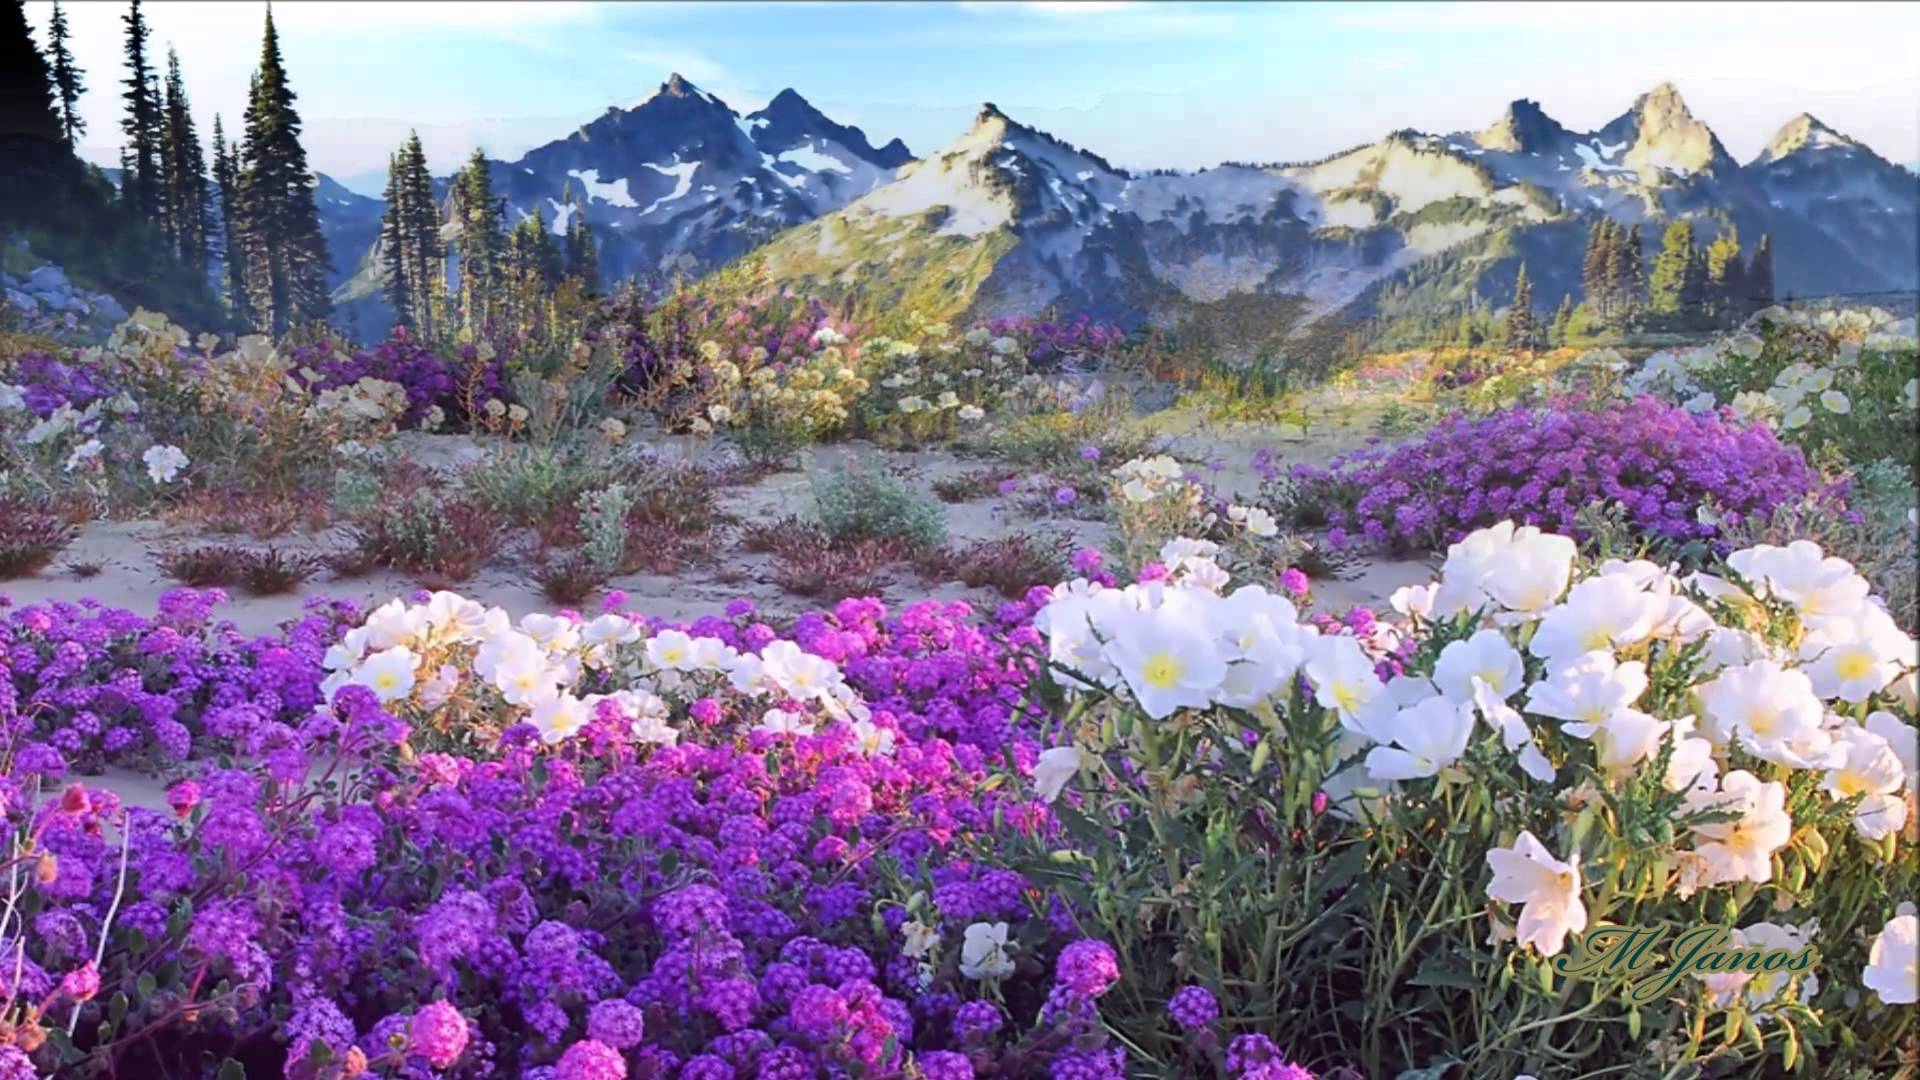 ♪♫Flowers of the Forest ~ Mike Oldfield - YouTube